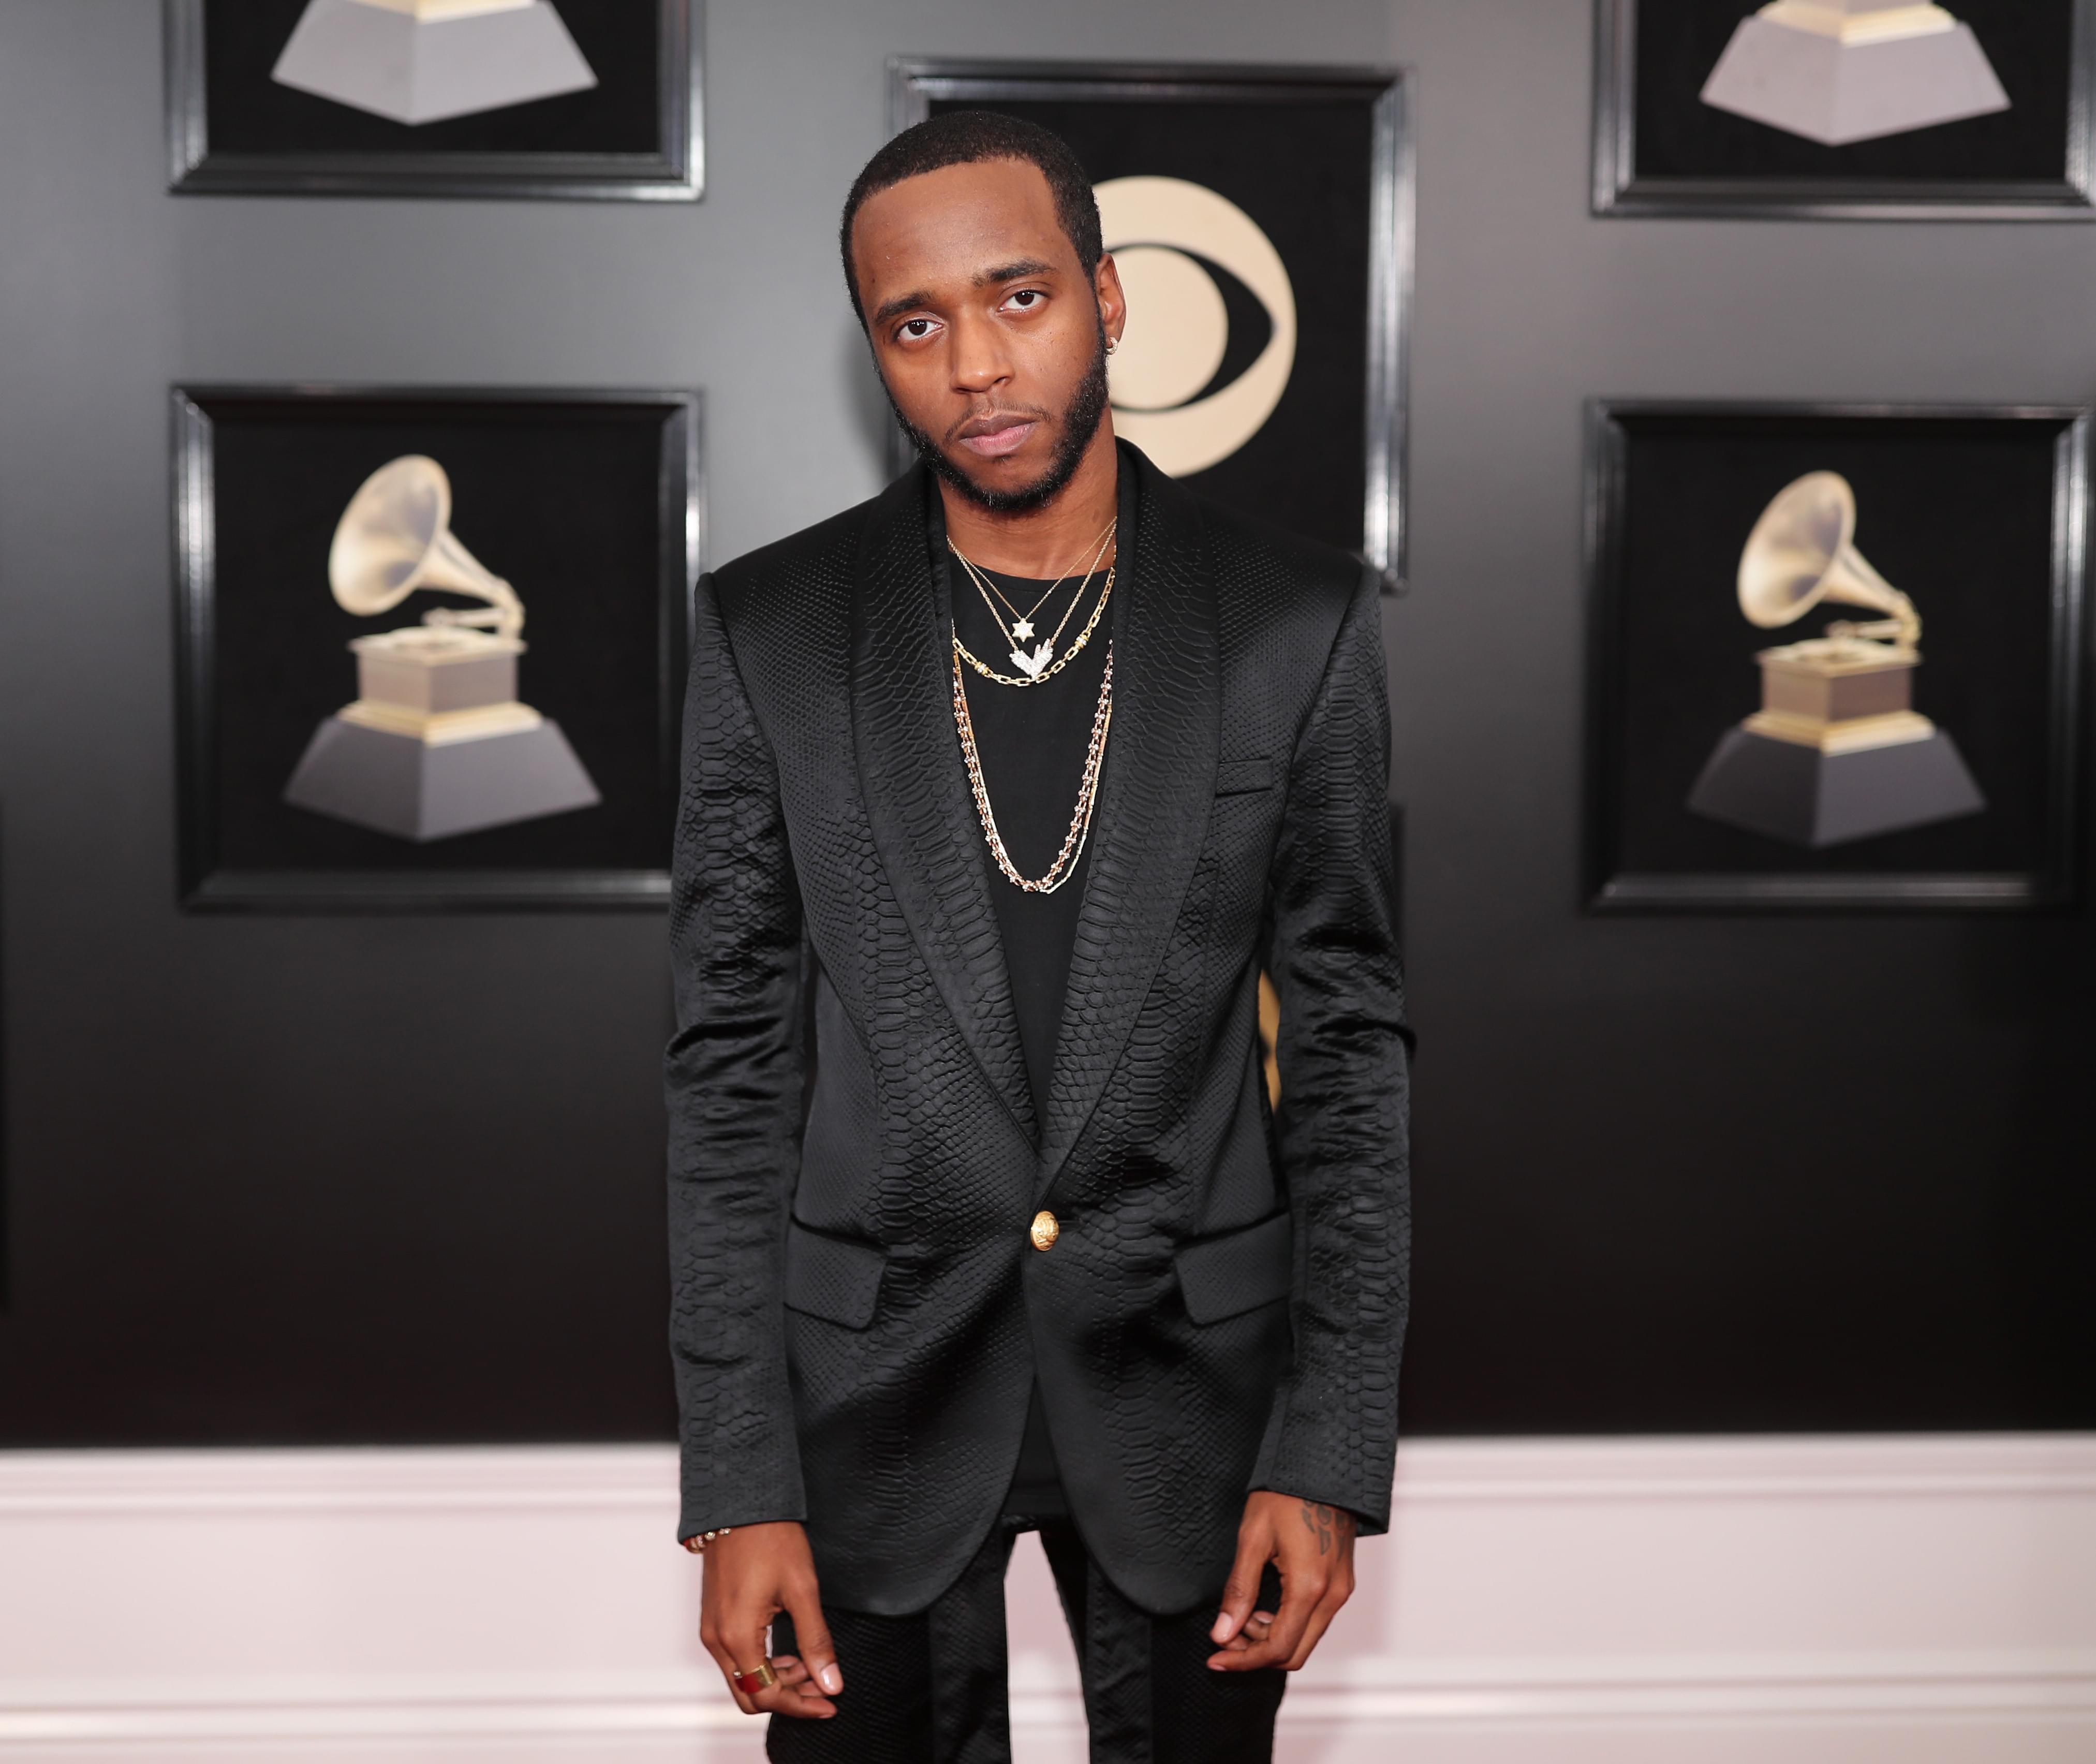 6lack Drops His First Single Of 2018: “Cutting Ties”